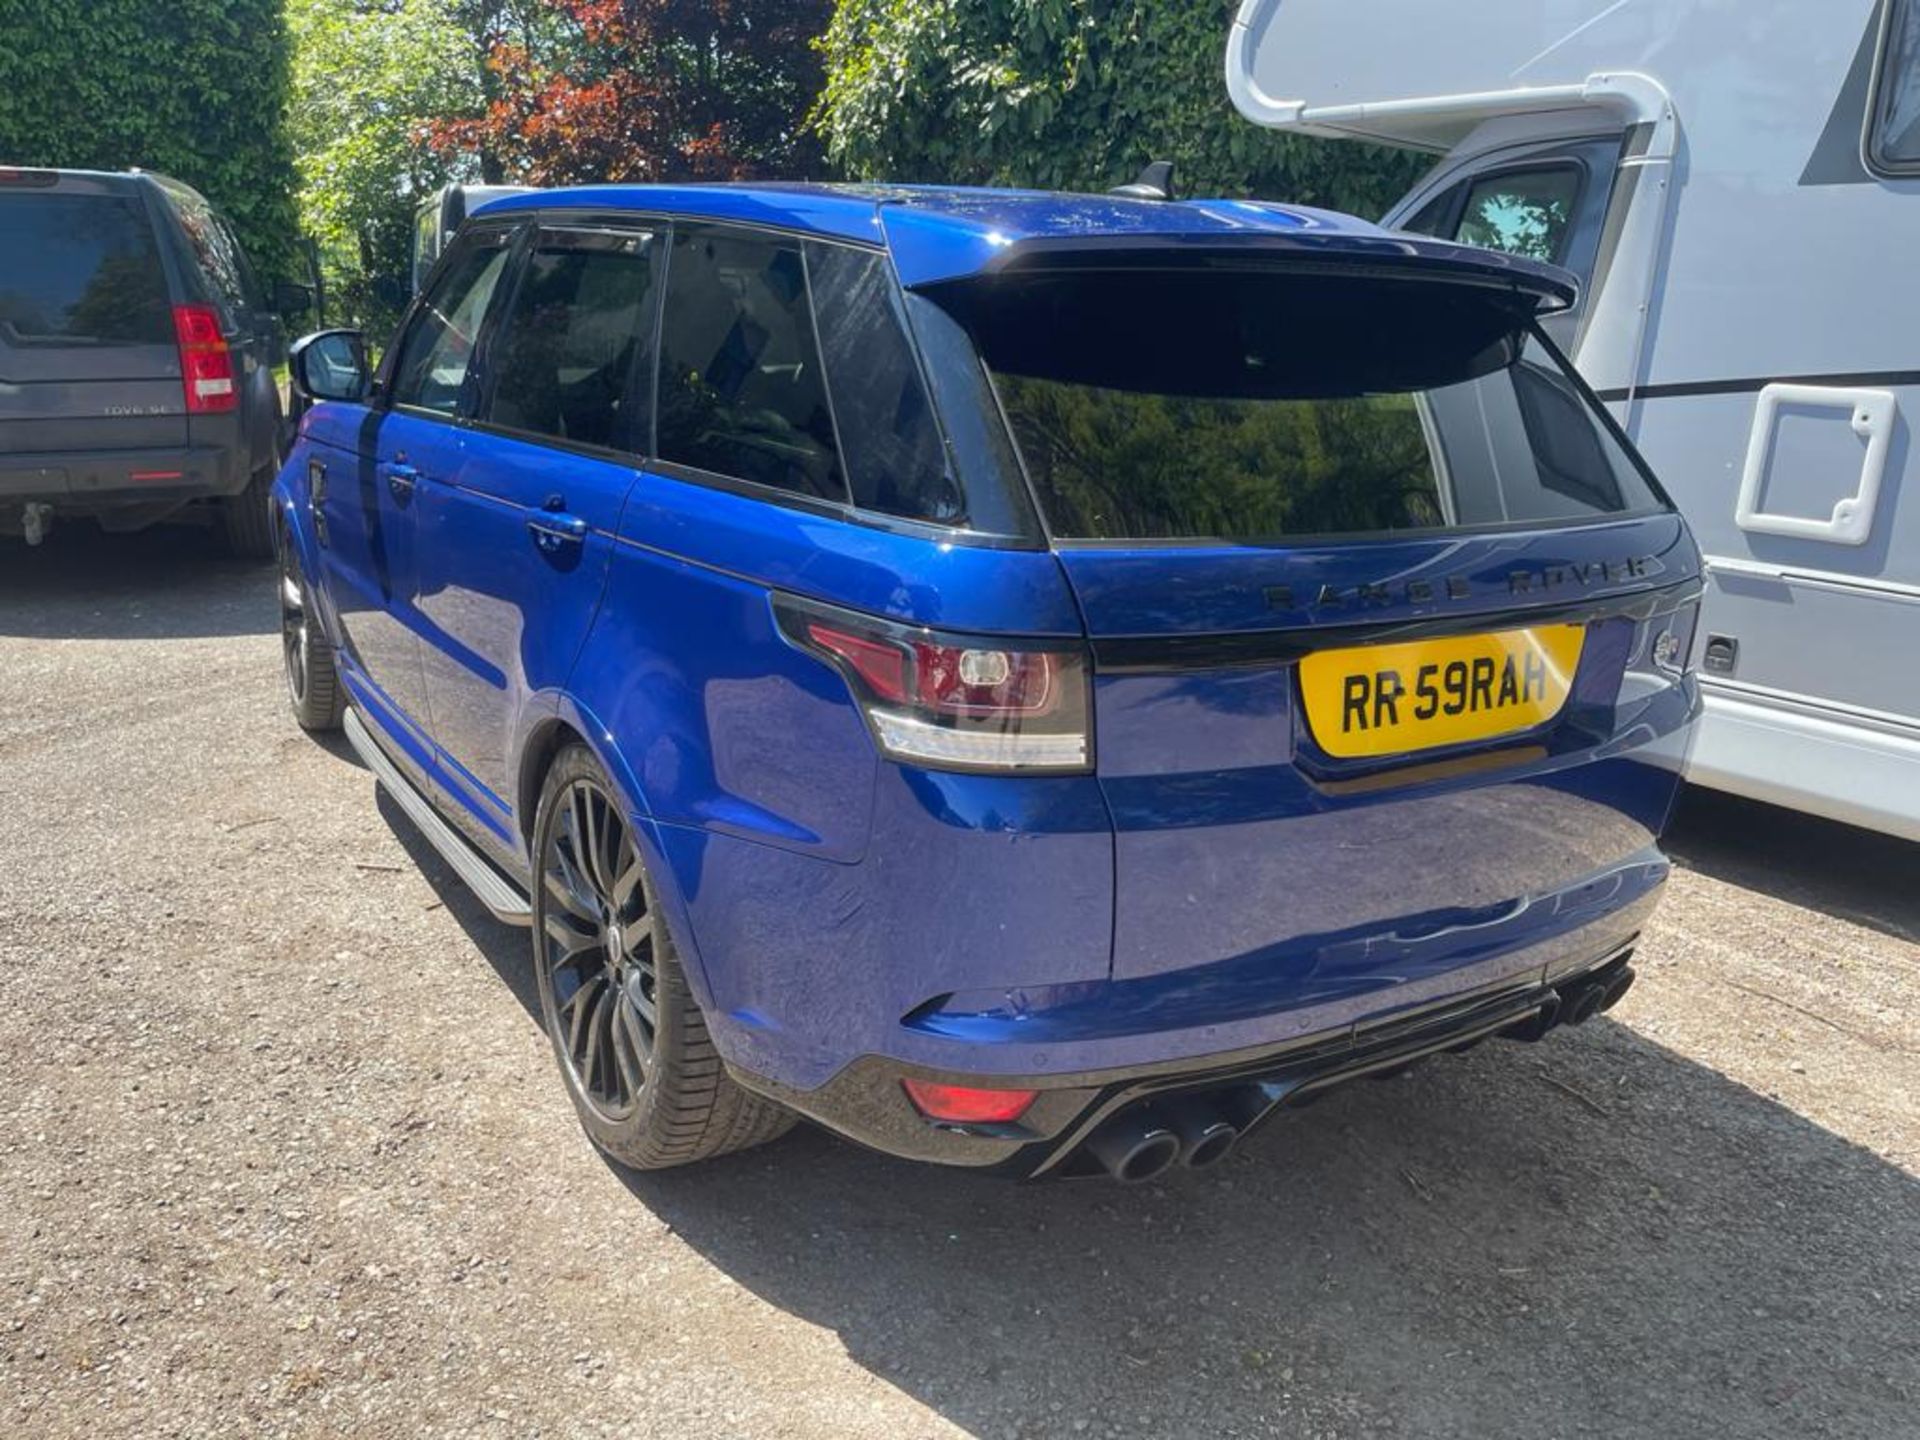 2016 RANGE ROVER SPORT SVR AUTOBIOGRAPHY DYNAMIC V8 SUPERCHARGED AUTOMATIC 5.0 550PS PETROL ENGINE - Image 9 of 28